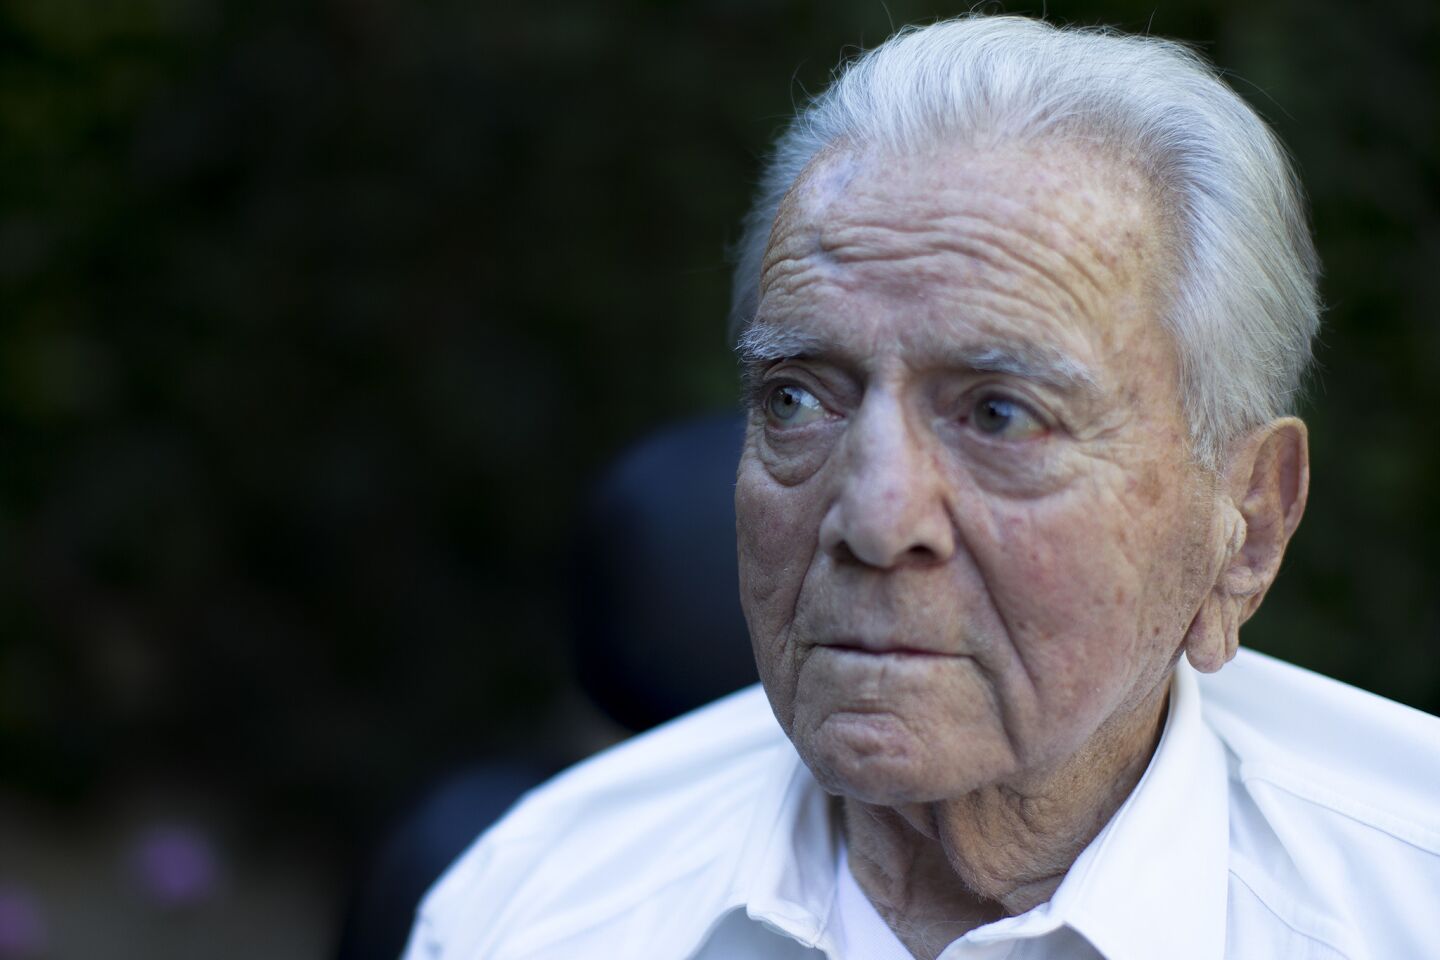 The attorney and almond farmer was known for his battle to stop the $68-billion California bullet train project from slicing up his almond orchards -- part of a deeply emotional land war that has drawn in hundreds of farming families from Merced to Bakersfield. He was 92. Full obituary